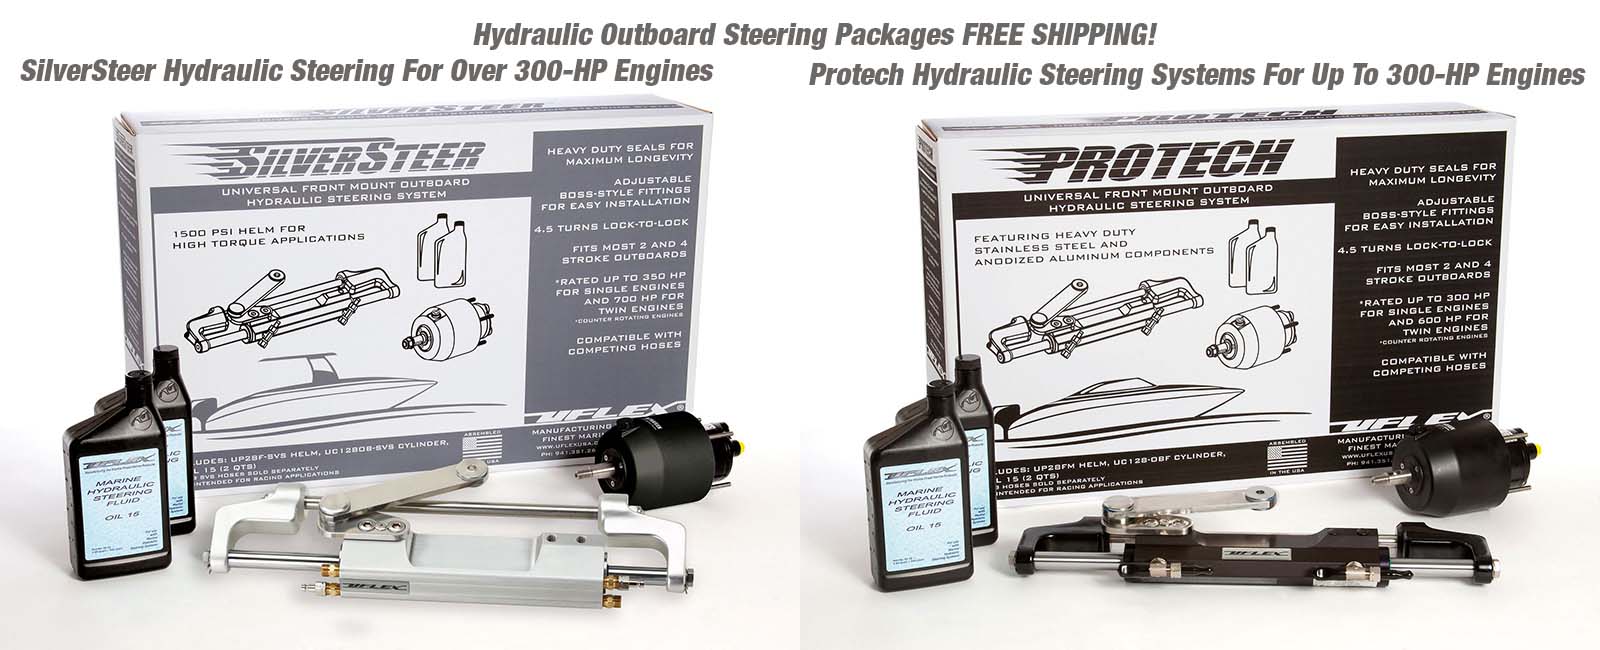 Uflex Outboard Sterndrive And Inboard Boat Hydraulic Steering Systems